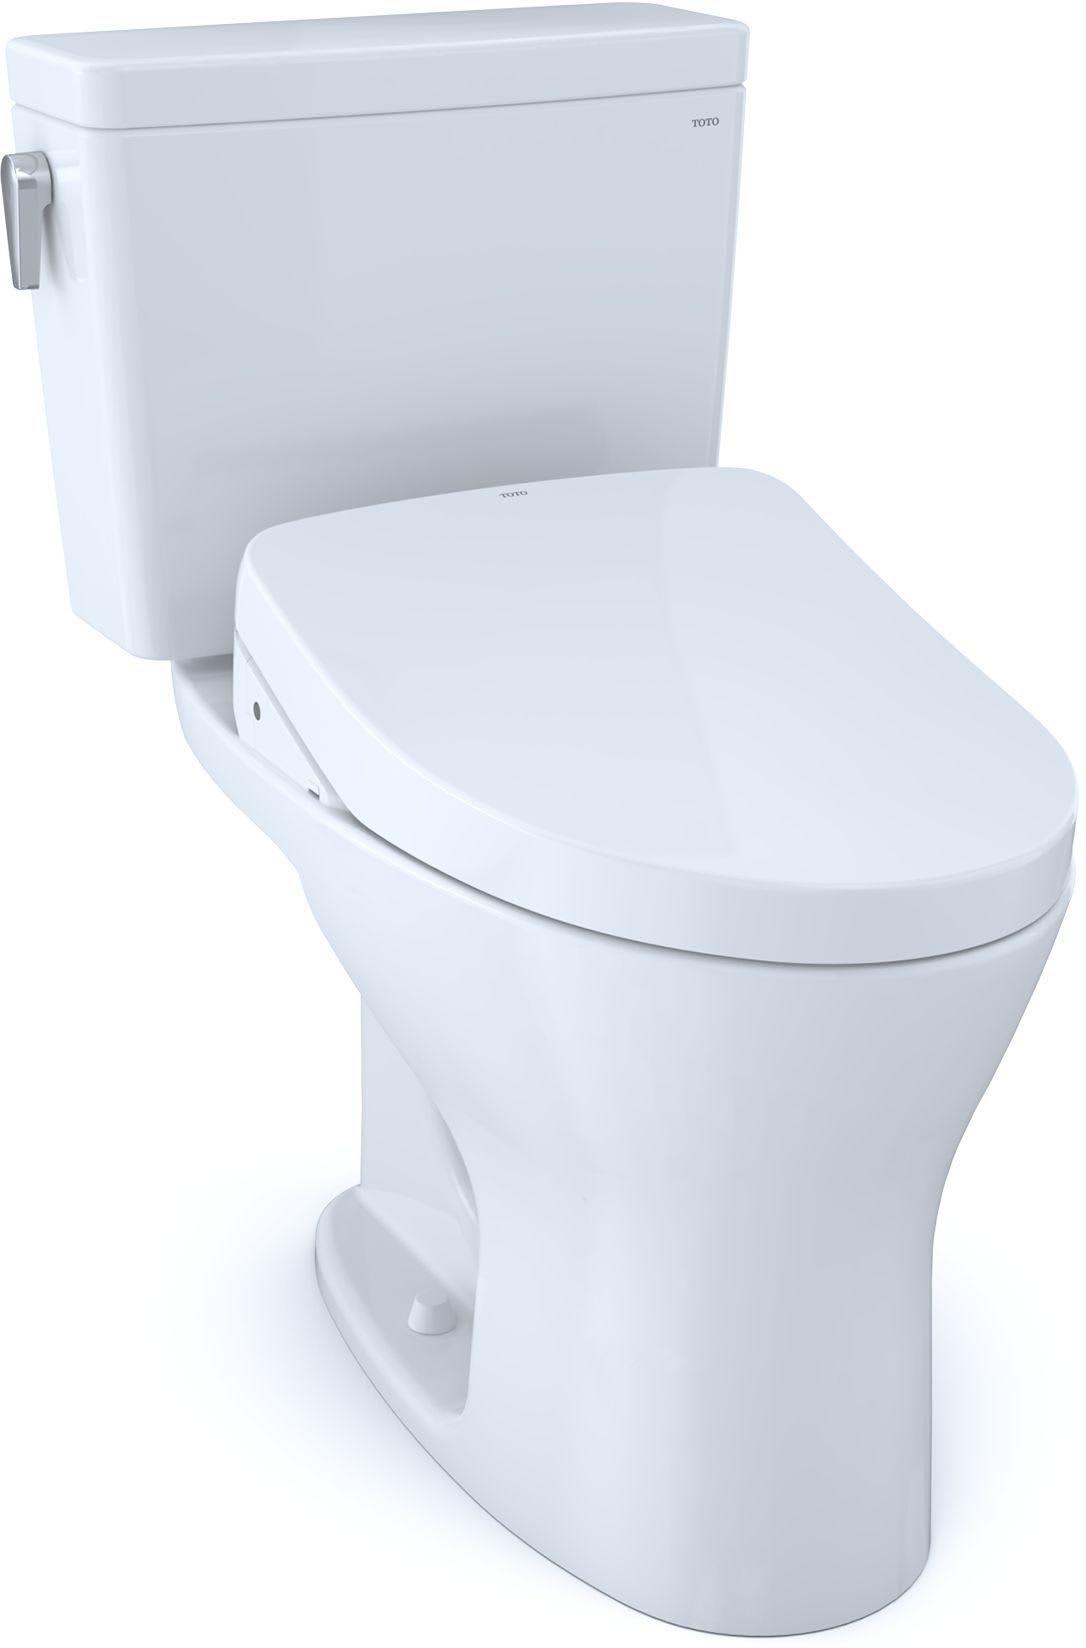 Toto Mwcumfga 01 Cotton Drake 0 8 1 0 Gpf Dual Flush Two Piece Elongated Toilet With Left Hand Lever Washlet Auto Flush Bidet Seat Included Faucetdirect Com